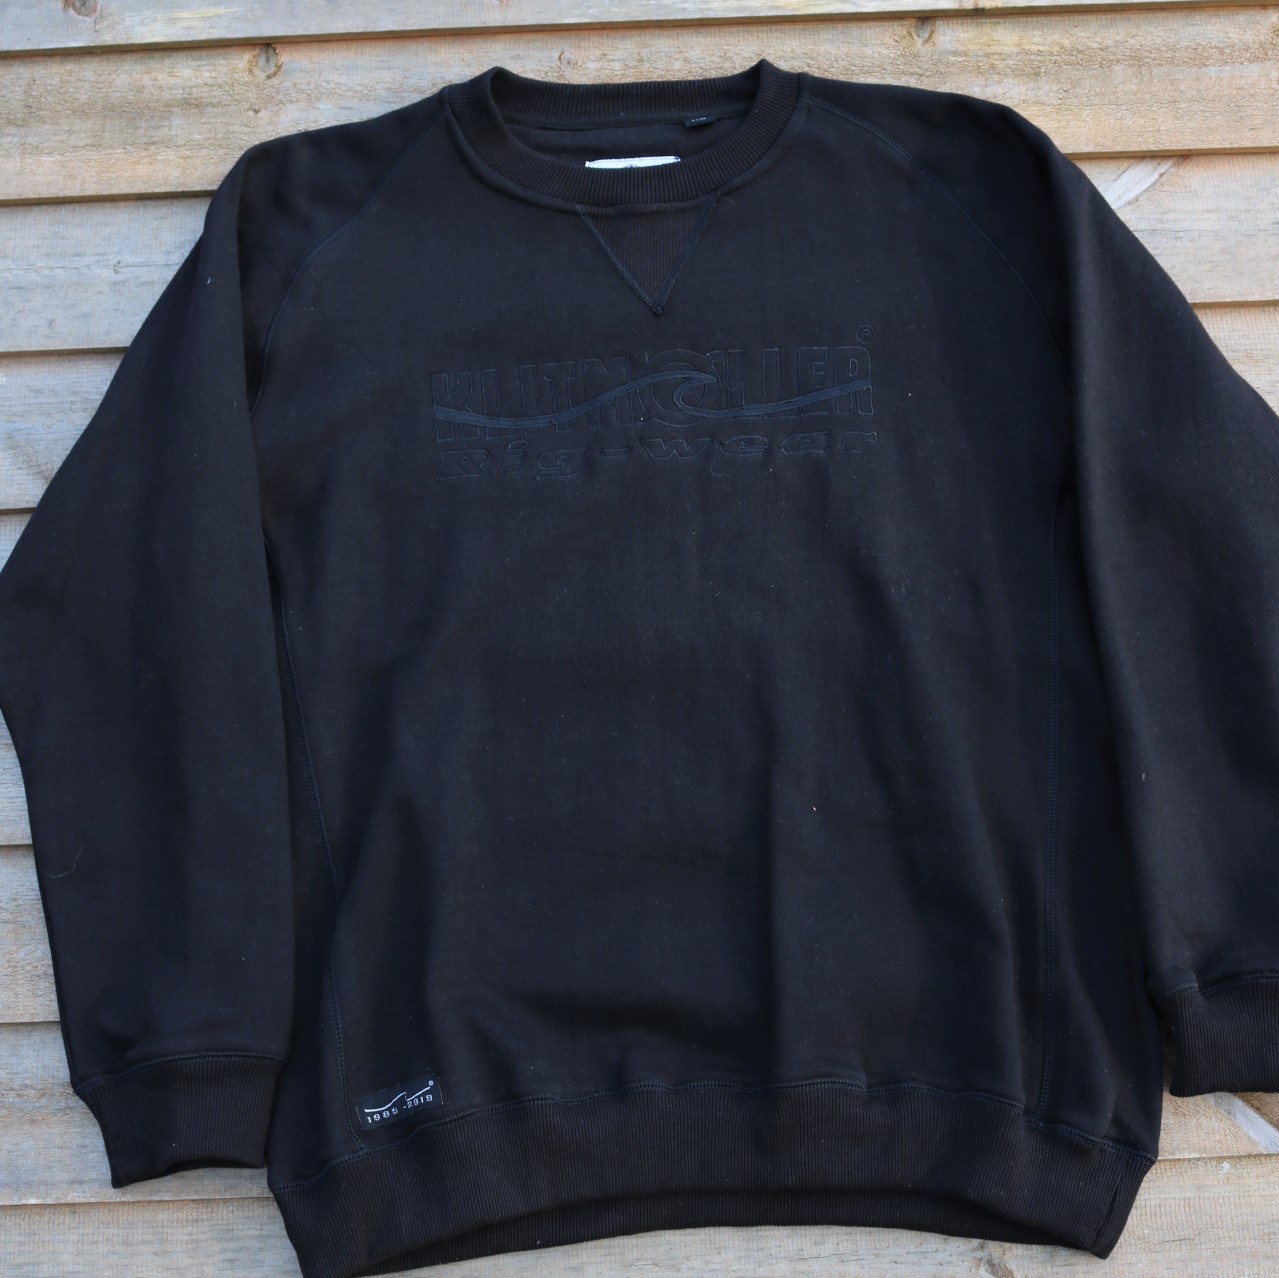 NEW Sweatshirt with chest logo embroidery